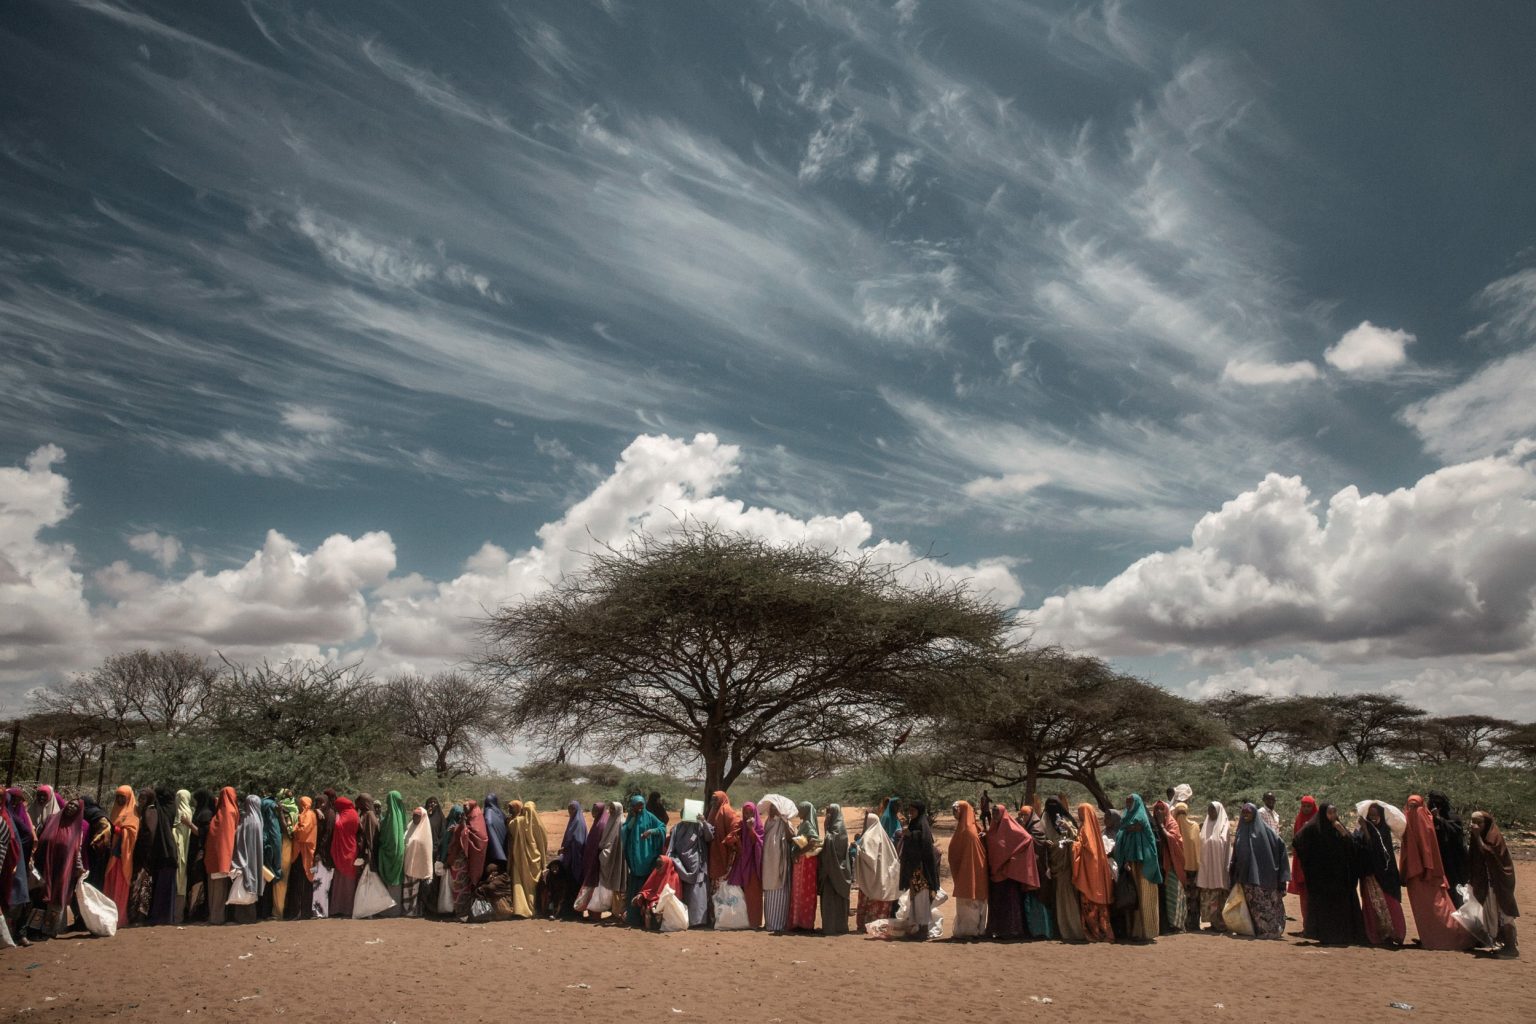 Africa, Kenya, Dadaab. 01/03/2016. Dadaab remains the largest refugee camp in the world, with more than 350,000 inhabitants, 95% of them from Somalia. 
Located in a semi-arid region of Kenya, 80 km from the Somali border, the camp arose in the Nineties to contain the displaced fleeing from the civil war in Somalia, and has continued to expand since then. Today it is composed of 5 large tent cities spread over more than 50 km. 

The first week of every month, for five days, food is distributed in Dadaab. All 350,000 refugees report to the distribution points where the WFP distributes food rations. For each member, families are given a monthly ration of 3.5kg of corn, 3kg of flour, 1.8kg of pulses, 1.85lt of oil, 1kg of CSB (Corn-Soya Blend) and 150g of salt.